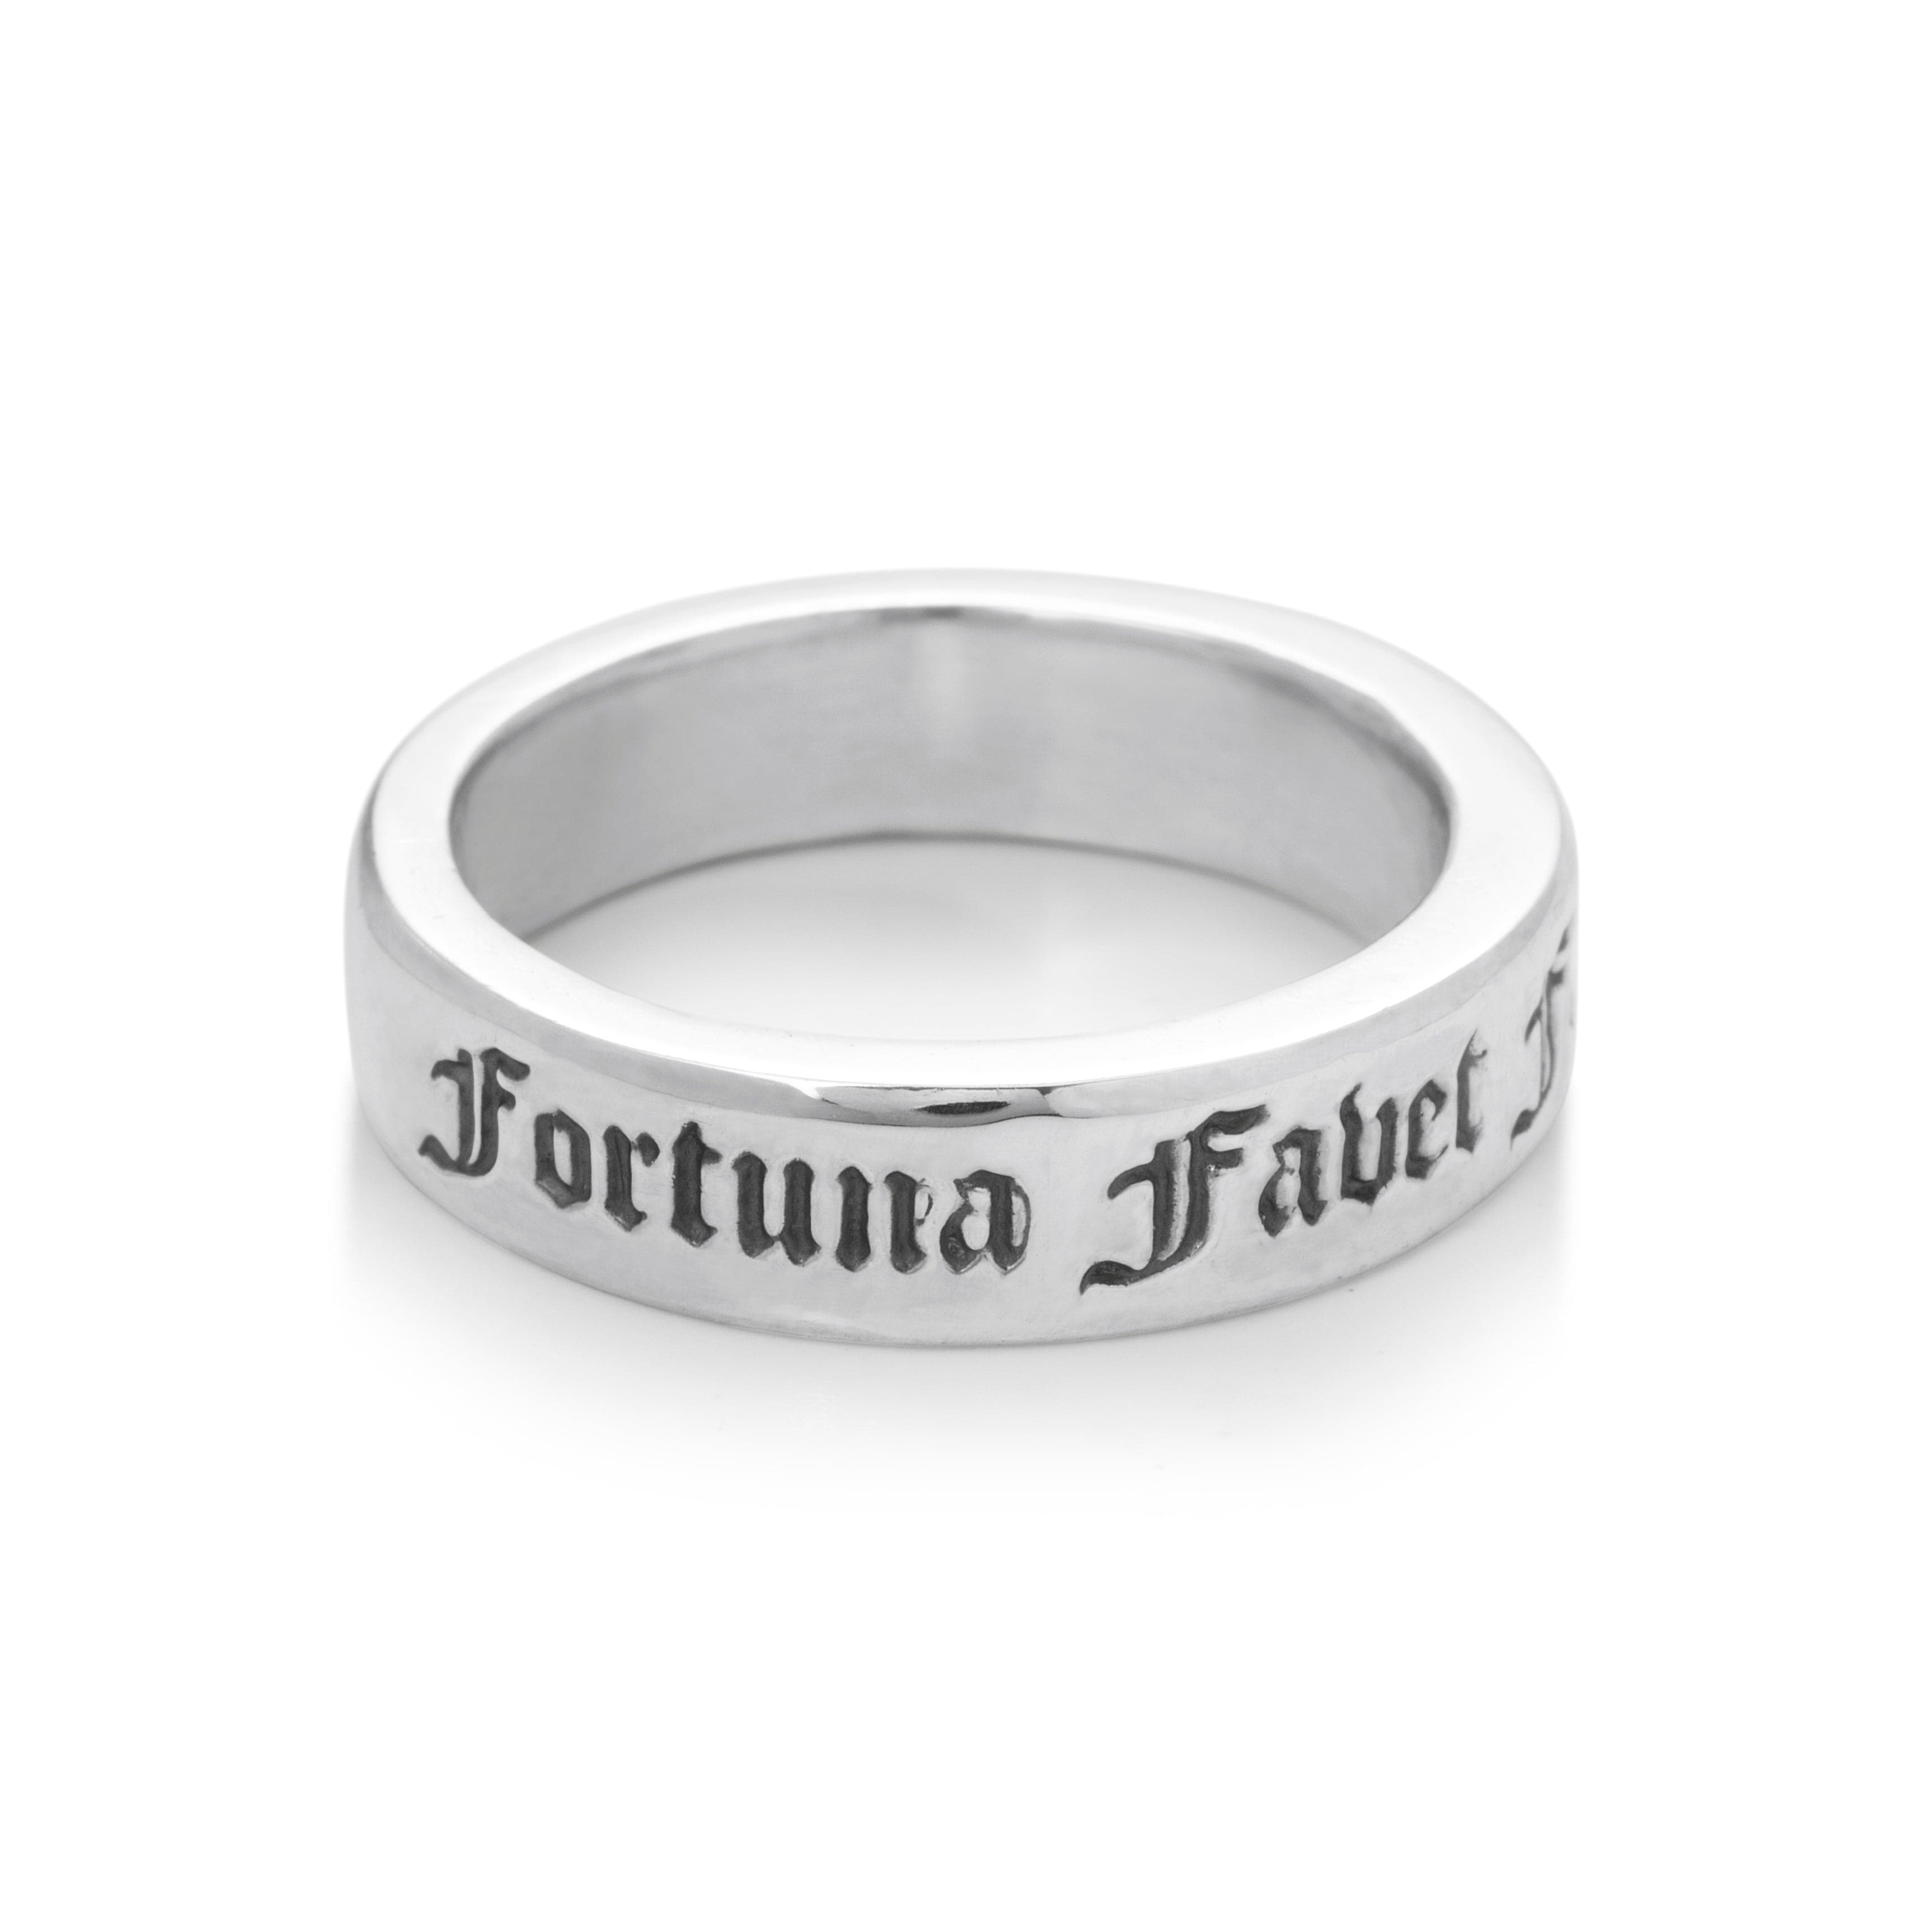 Solid Silver band inscribed with the latin words 